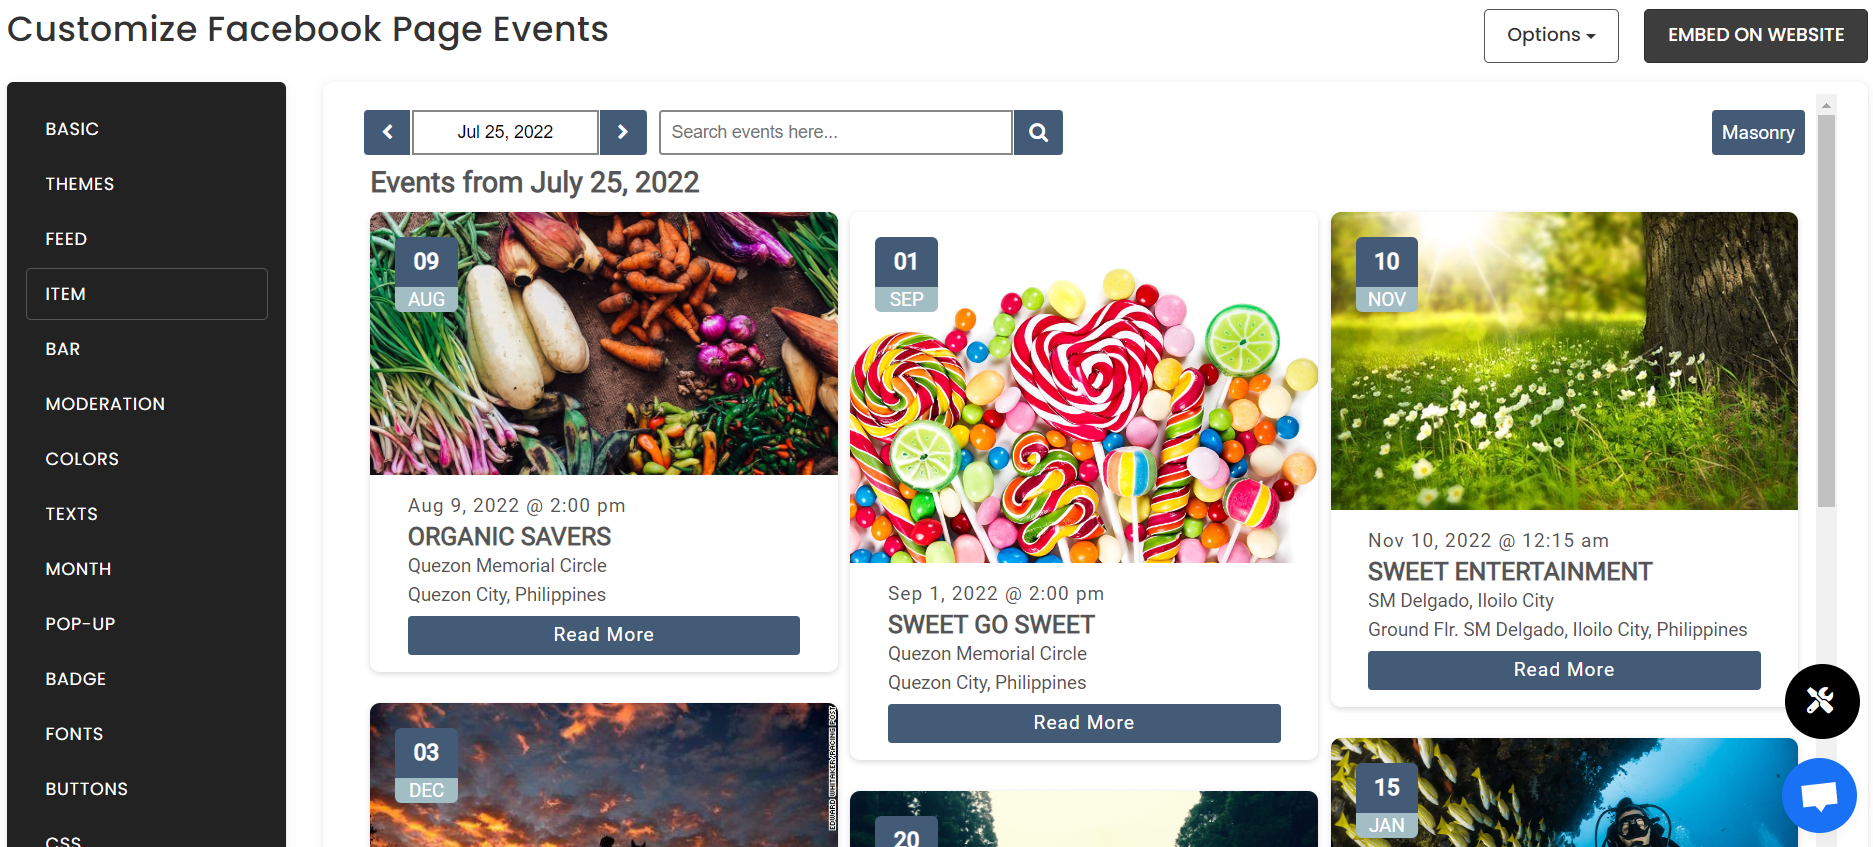 Customize your feed - How To Embed Facebook Page Events On Wix Website For Free?